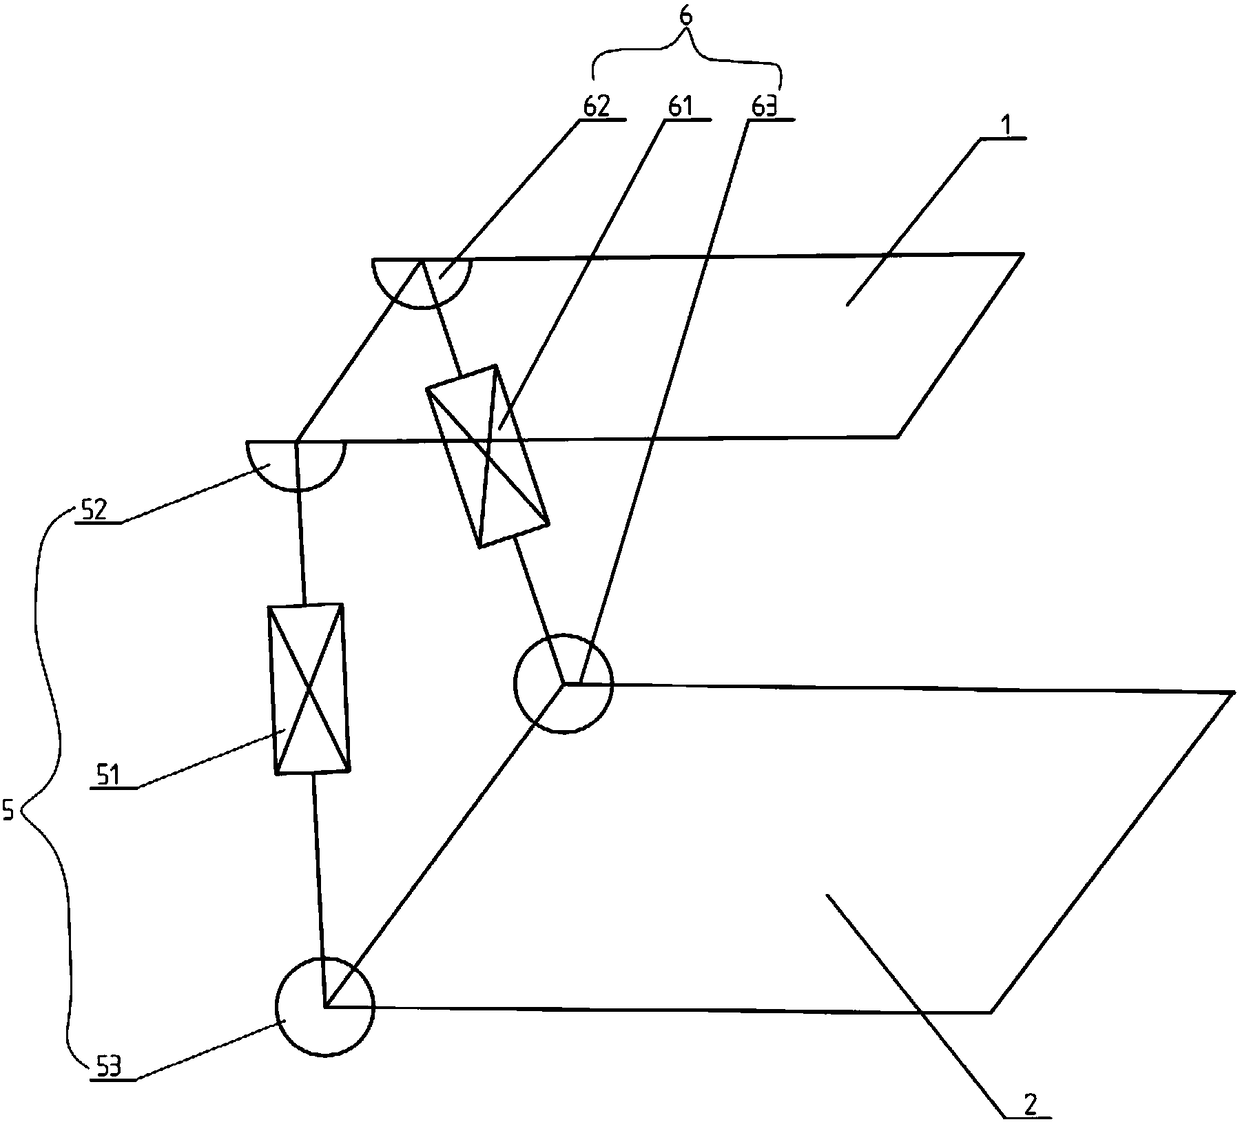 Four-degree-of-freedom parallel connection mechanism